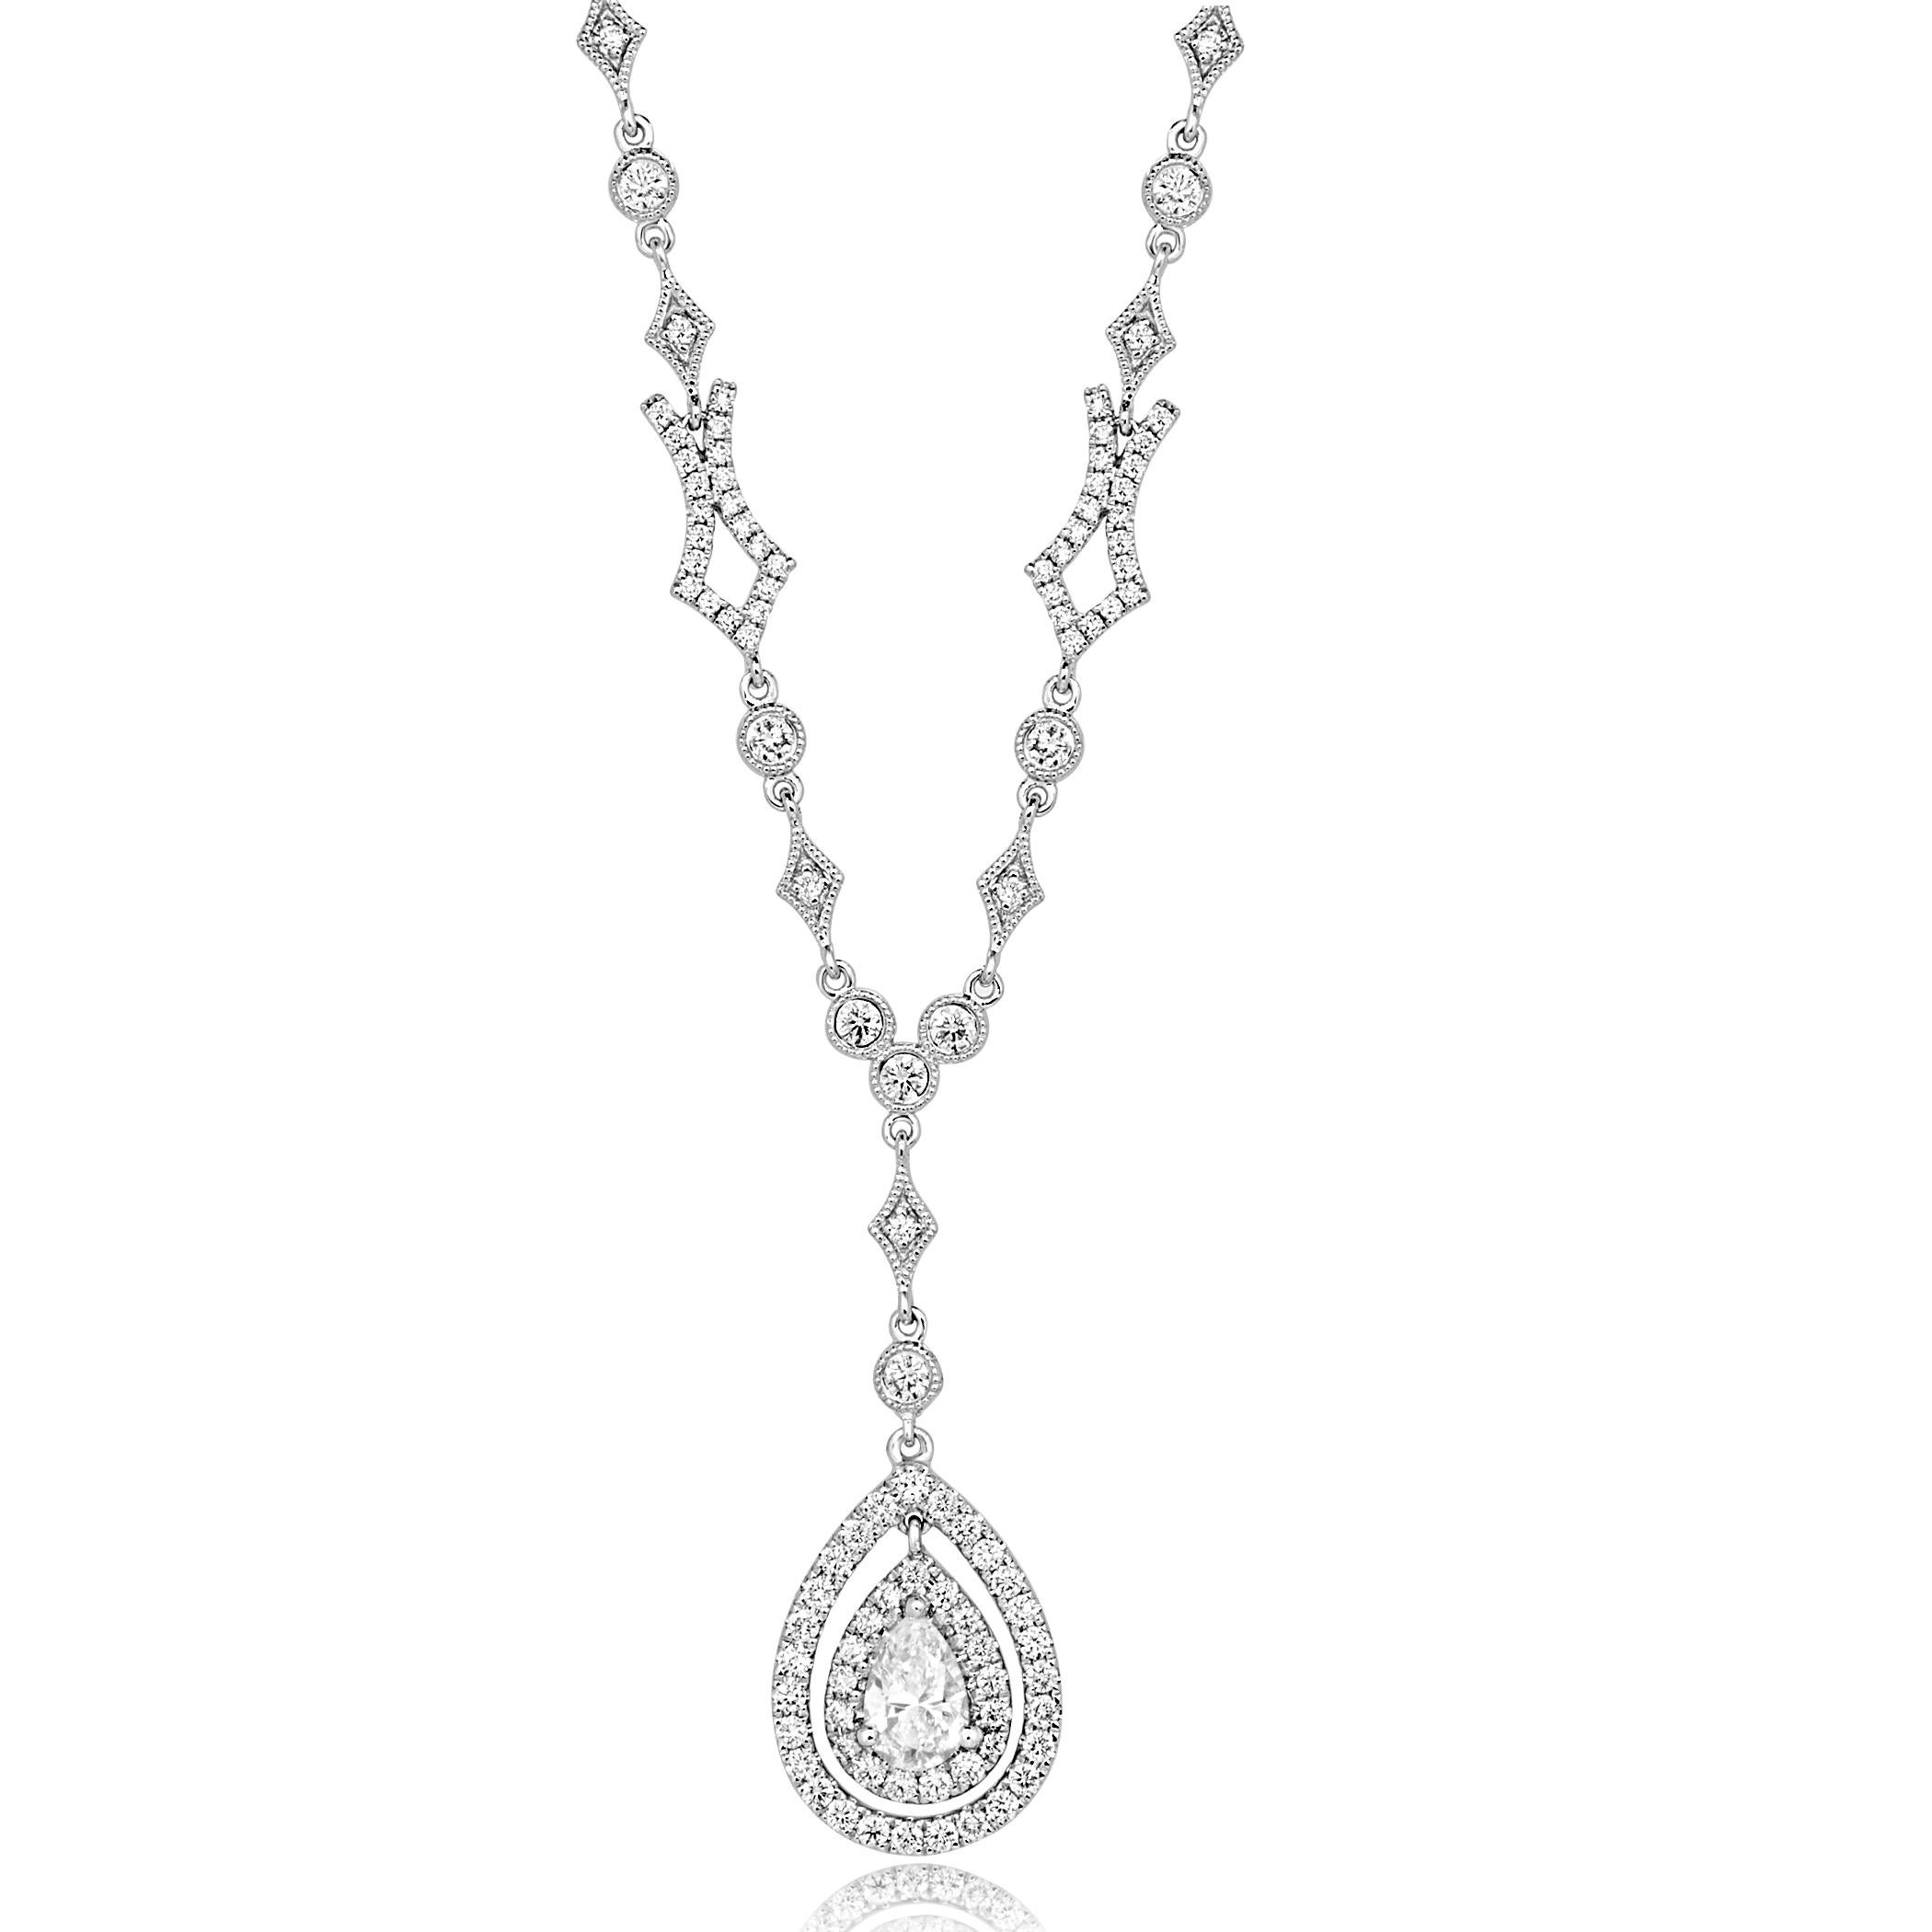 Stunning Colorless VS Diamond Pear 0.57 Carat Encircled in a double halo of Colorless VS-SI Diamond 1.30 Carat in Stunning 14K White Gold Drop Chain Pendant Necklace.

Total Diamond Weight  1.87 Carat 

Style available in different price ranges.